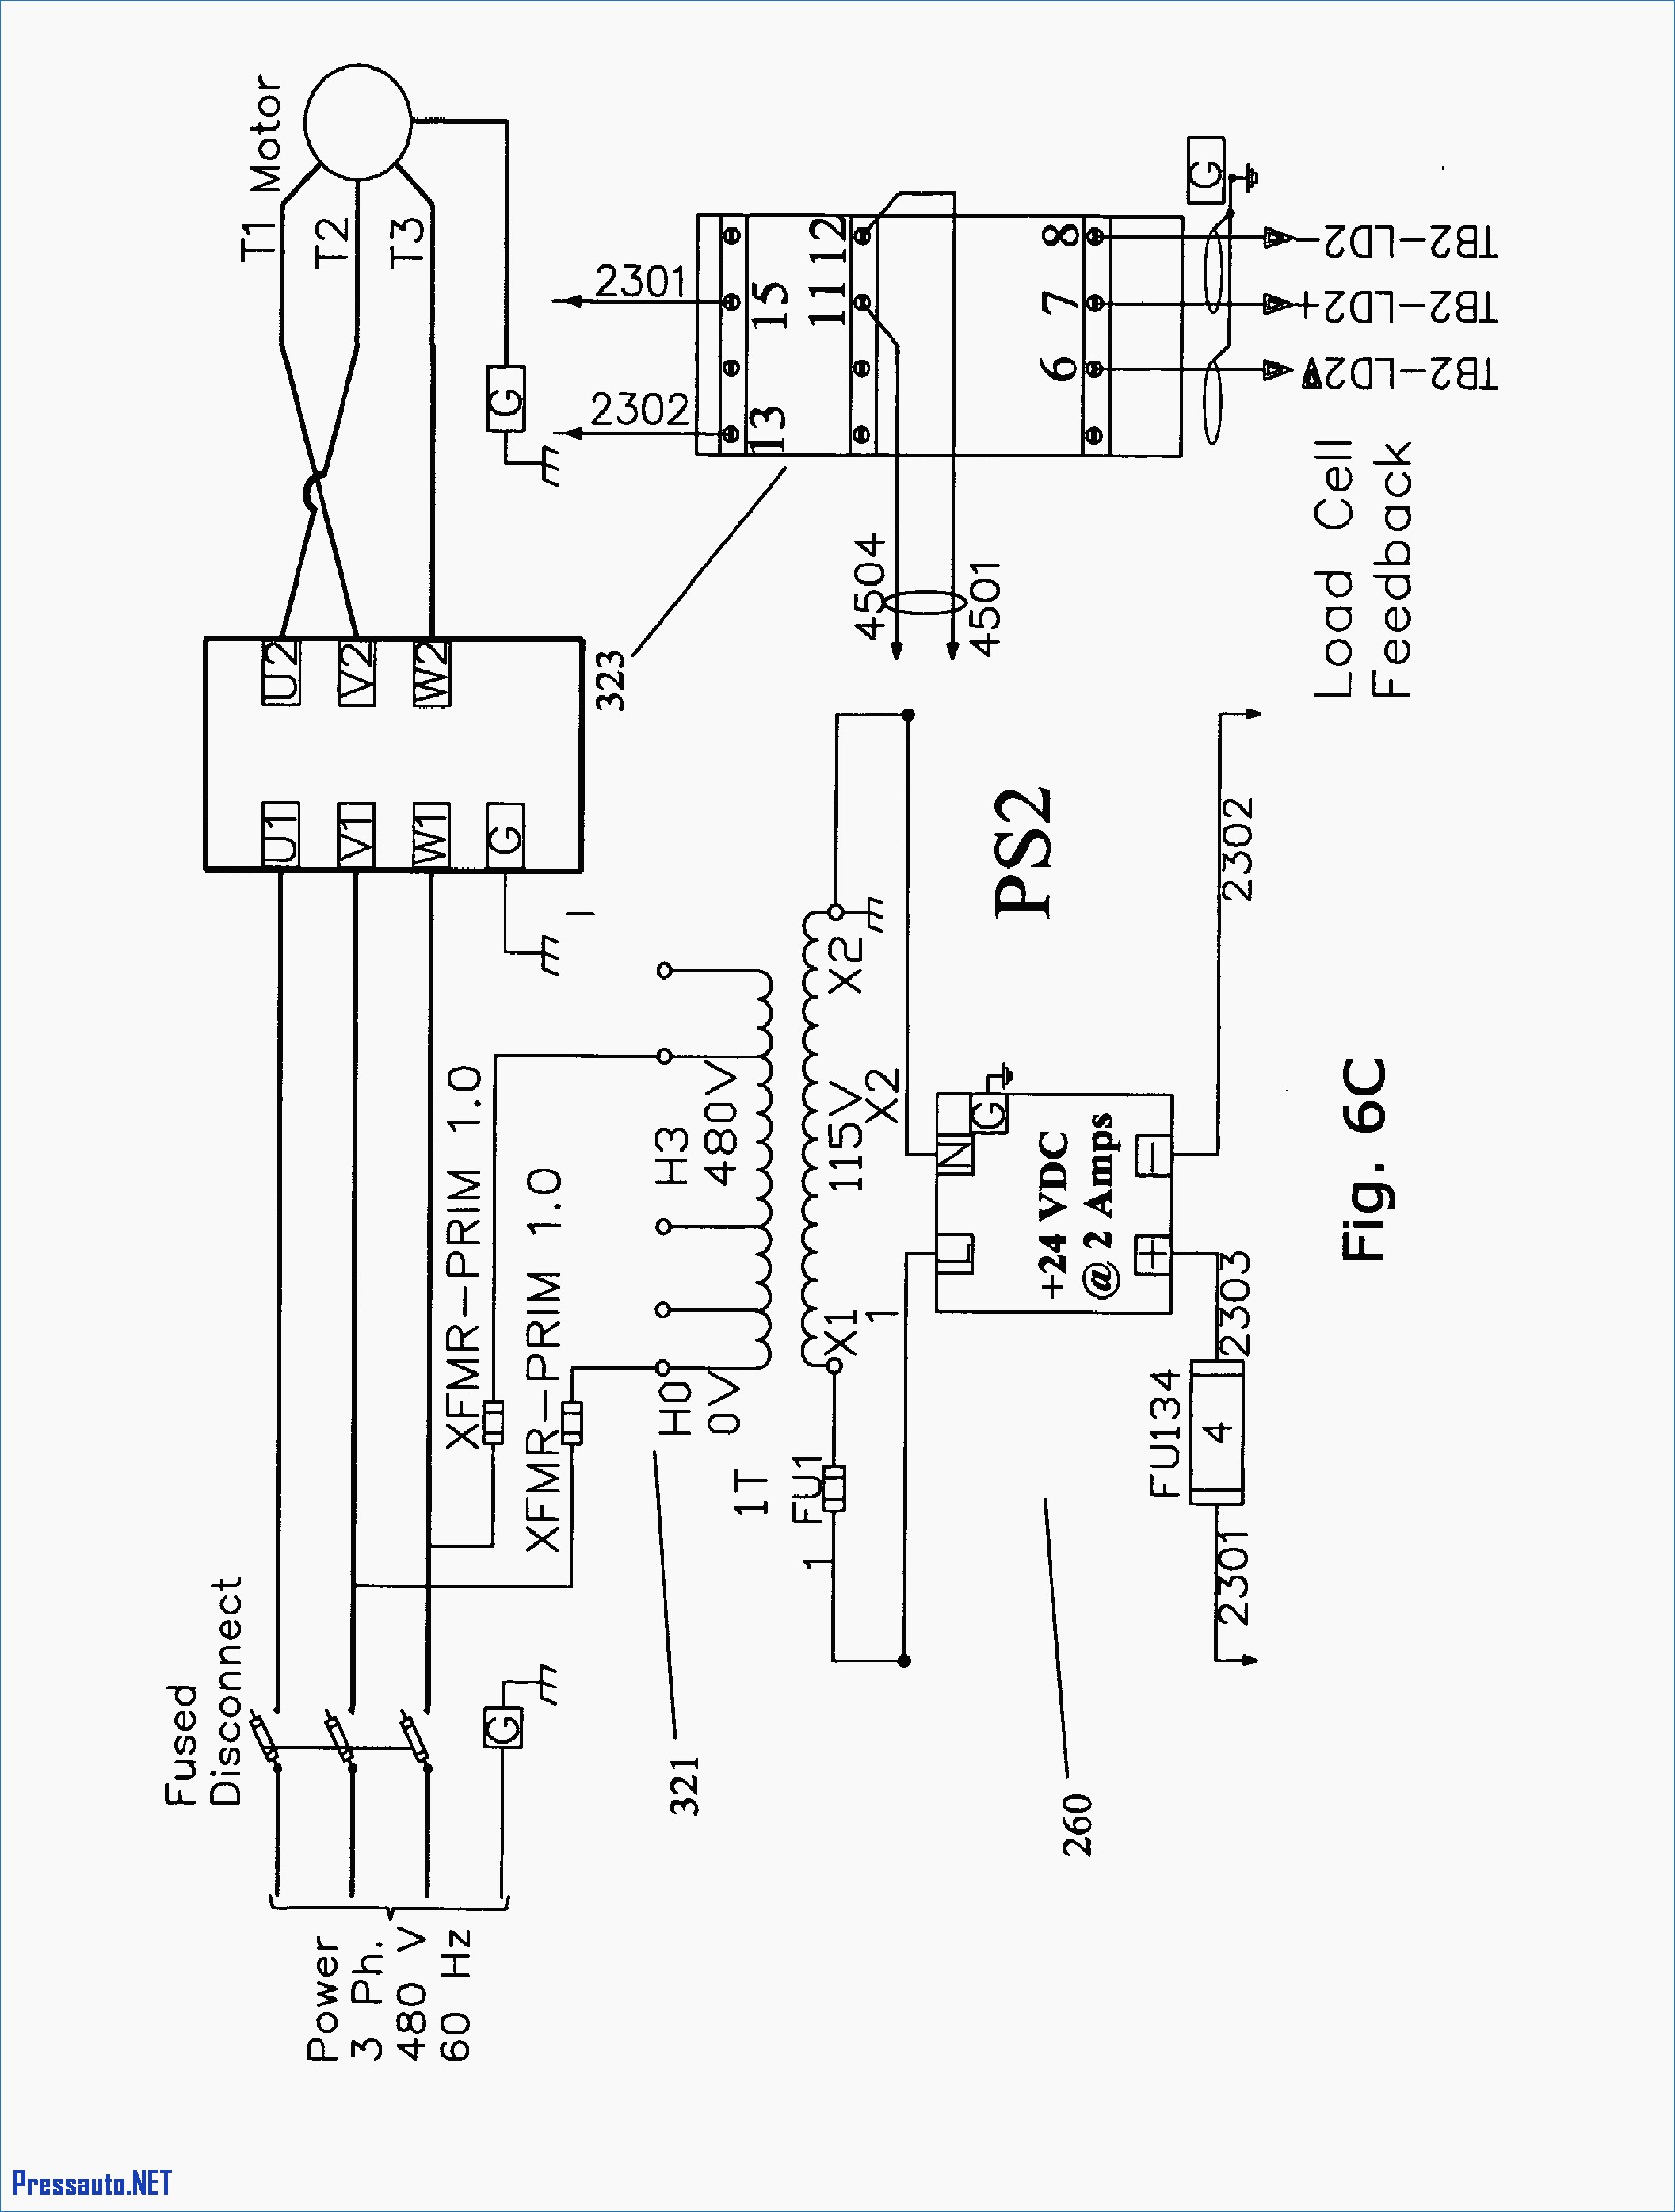 Vfd Connection Diagram with Motor Abb Drive Wiring Diagram Wiring